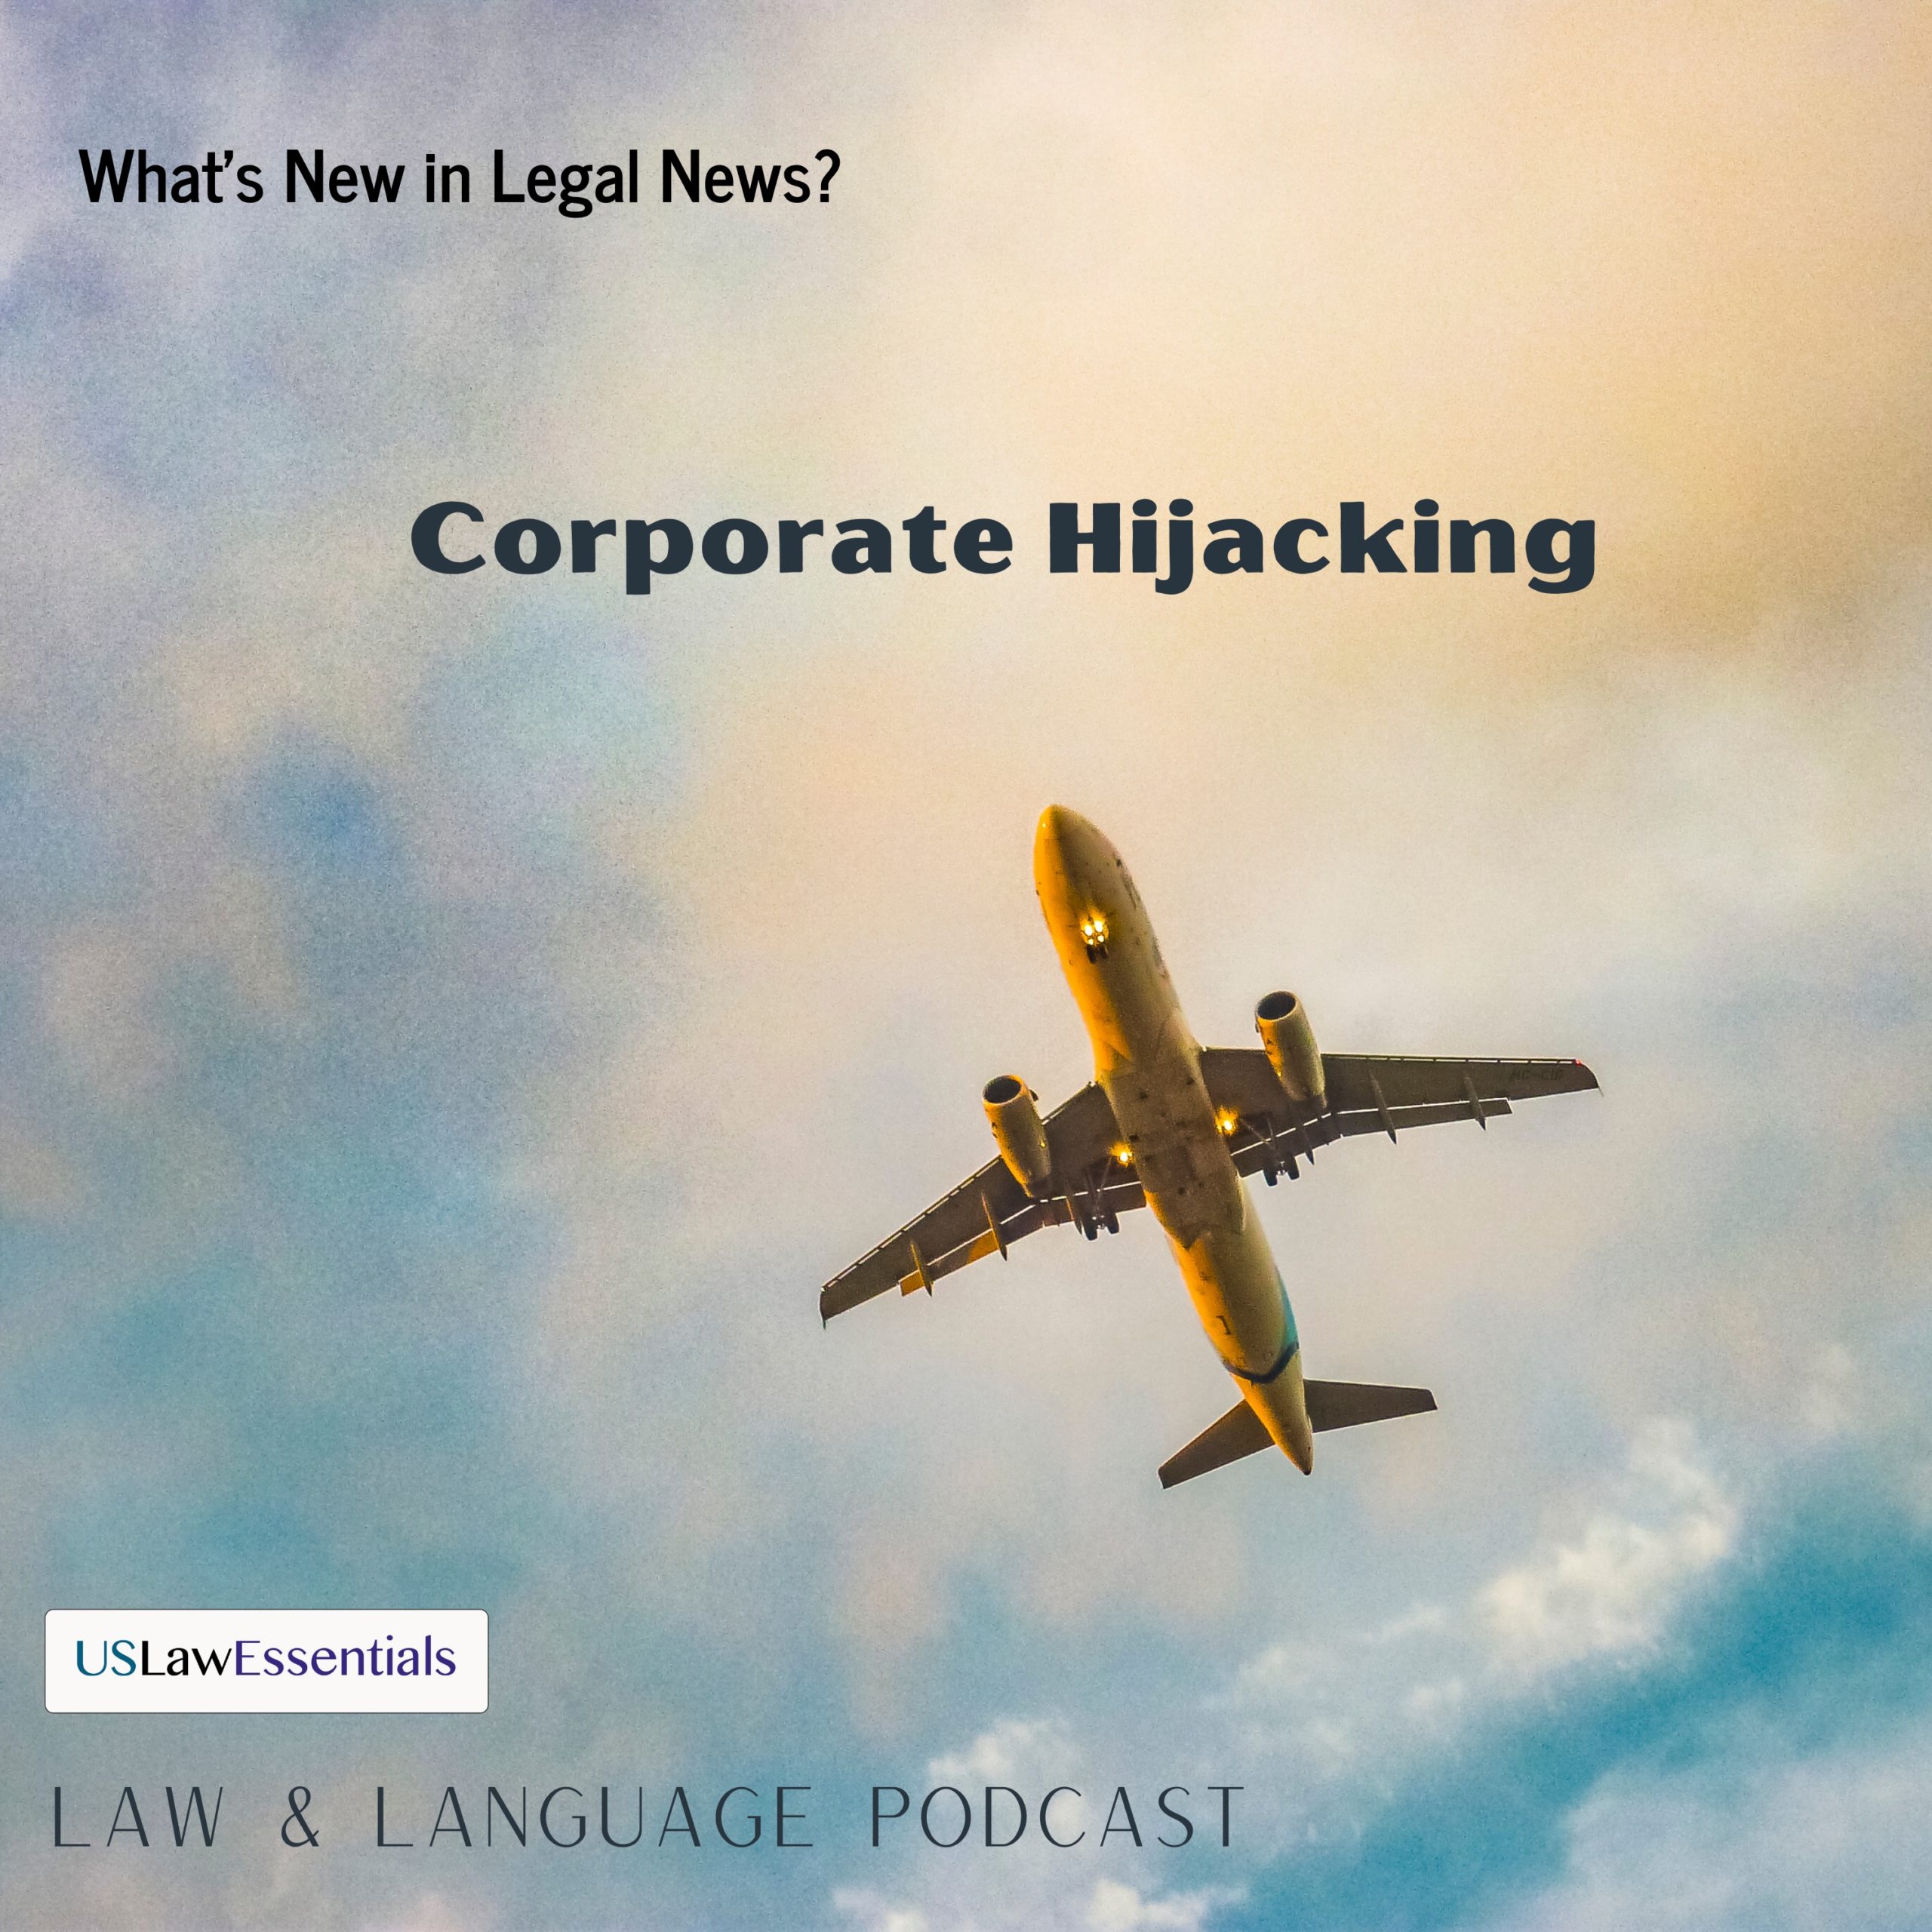 What’s New in Legal News? Corporate Hijacking